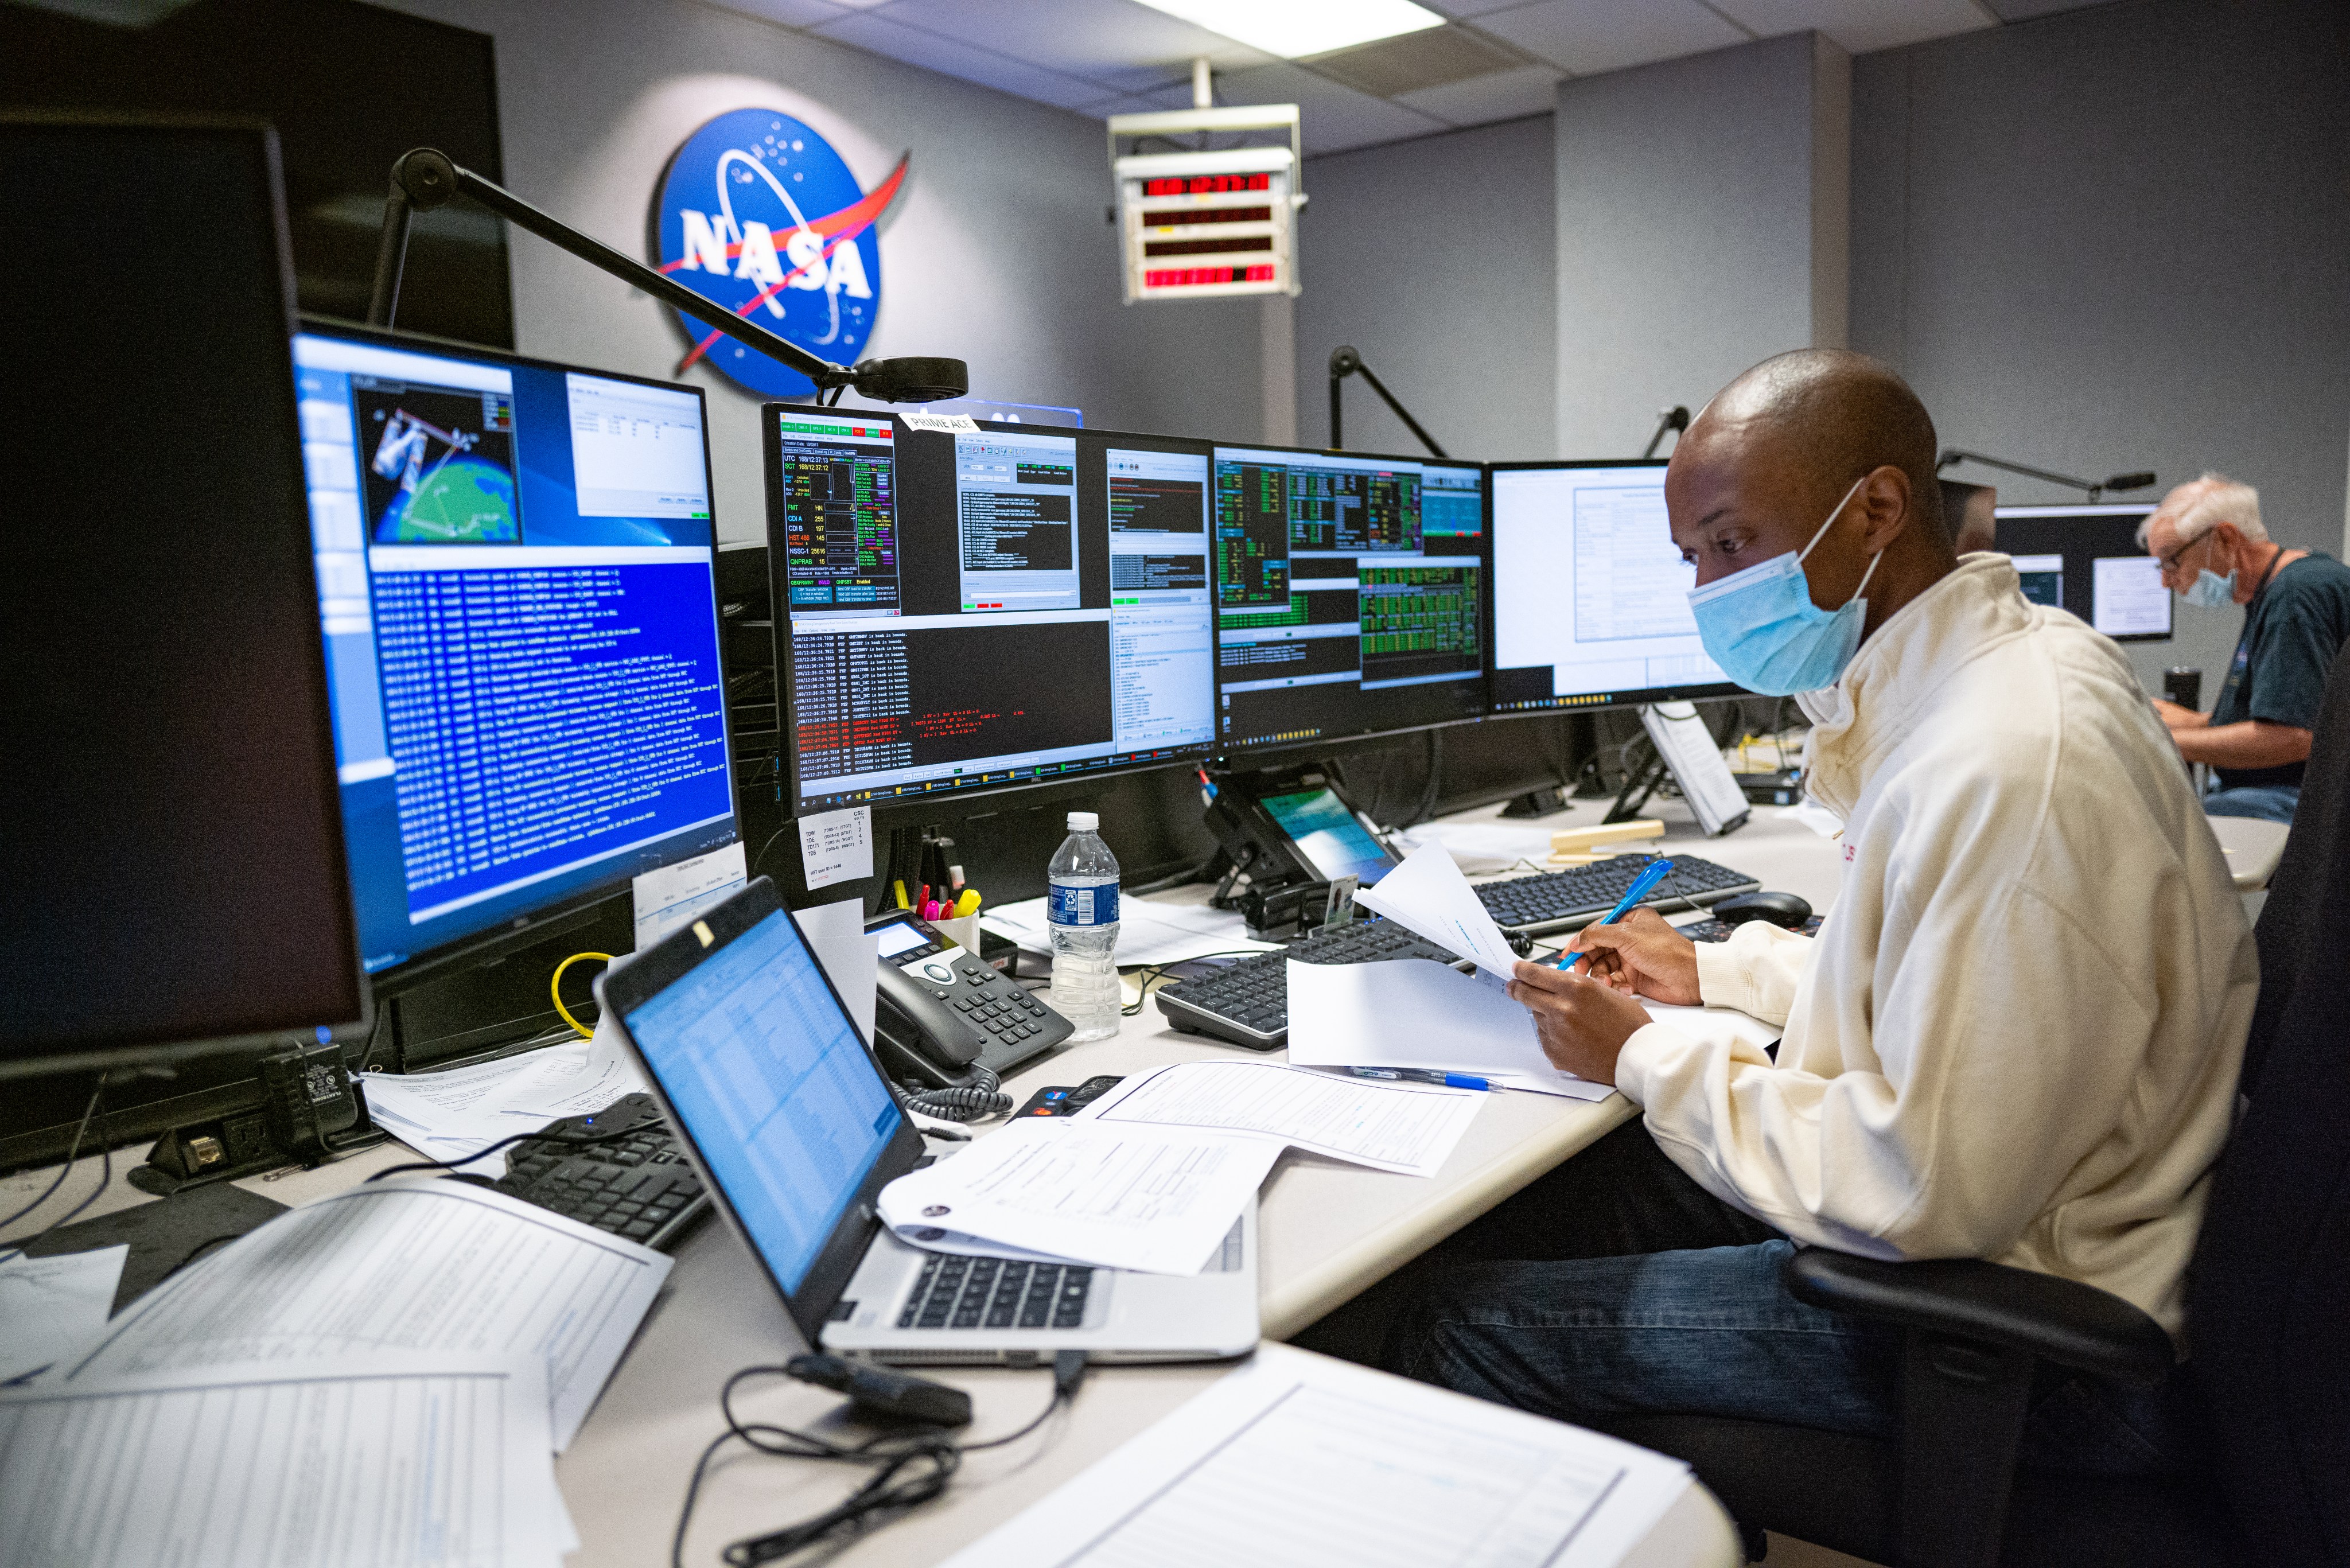 A man in a mask during the pandemic performs Hubble operations in the control center in front of computer monitors.